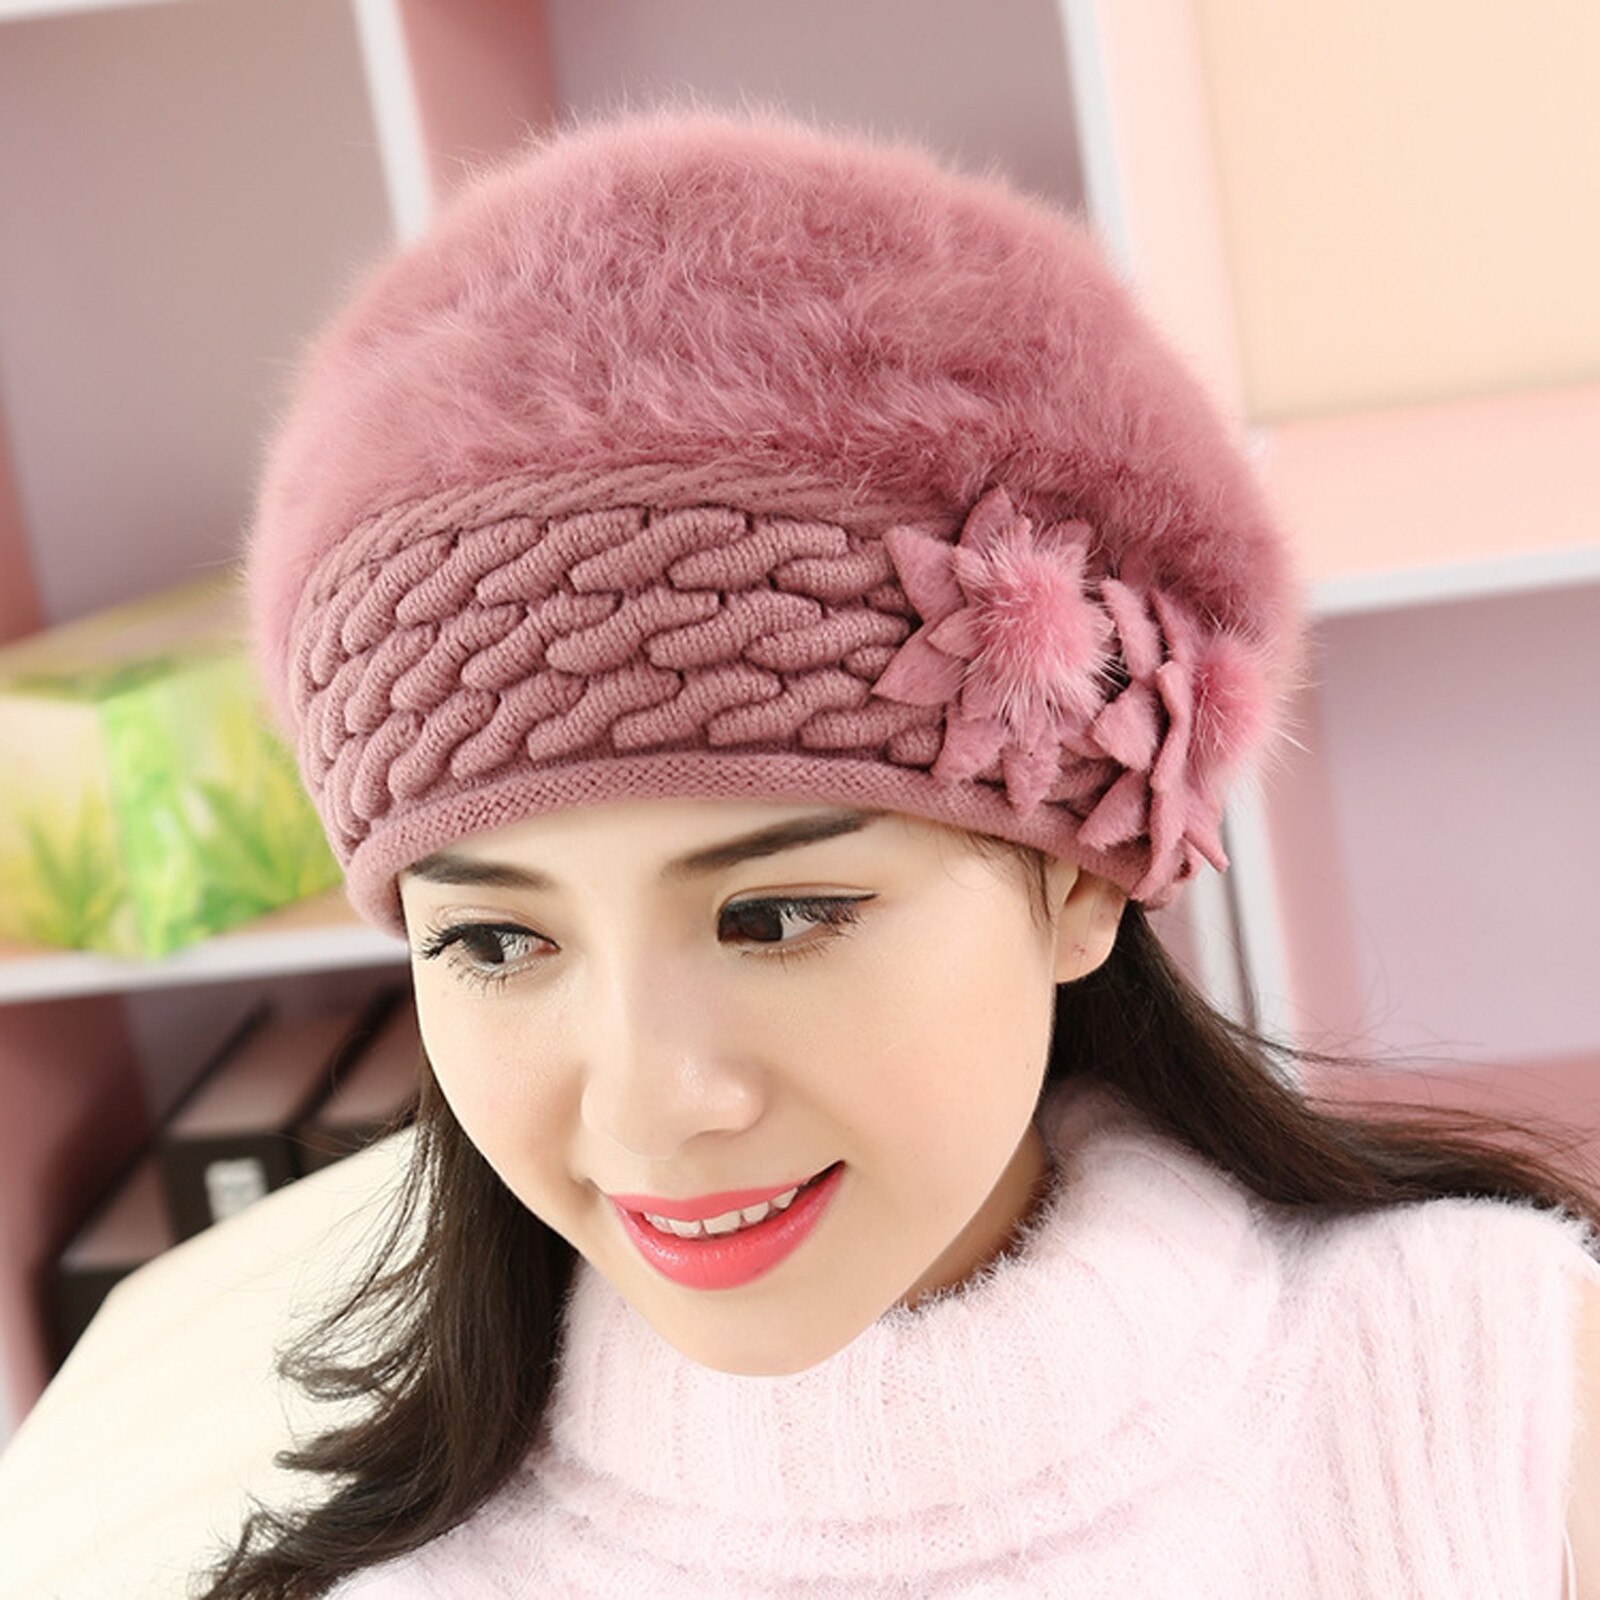 Beret Women Winter Hat Beanie Warm Knit Flower Double Layers Soft Thick Thermal Snow Skiing Outdoor Hats For Female Caps